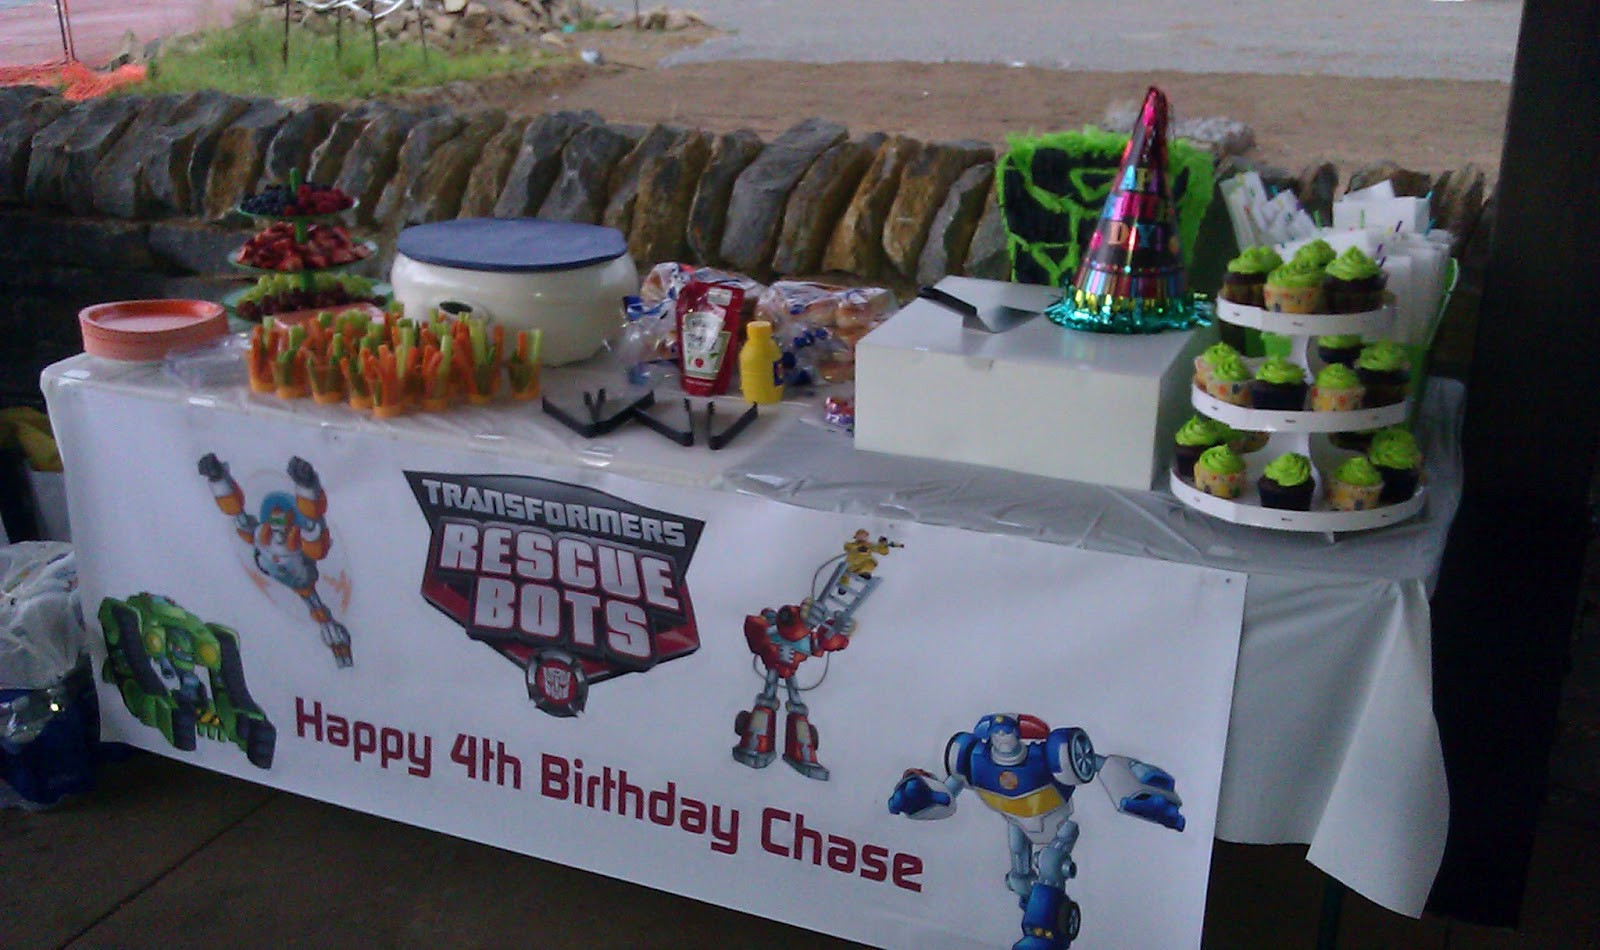 Rescue Bots Birthday Party Supplies
 Transformer Rescue Bots Birthday Party